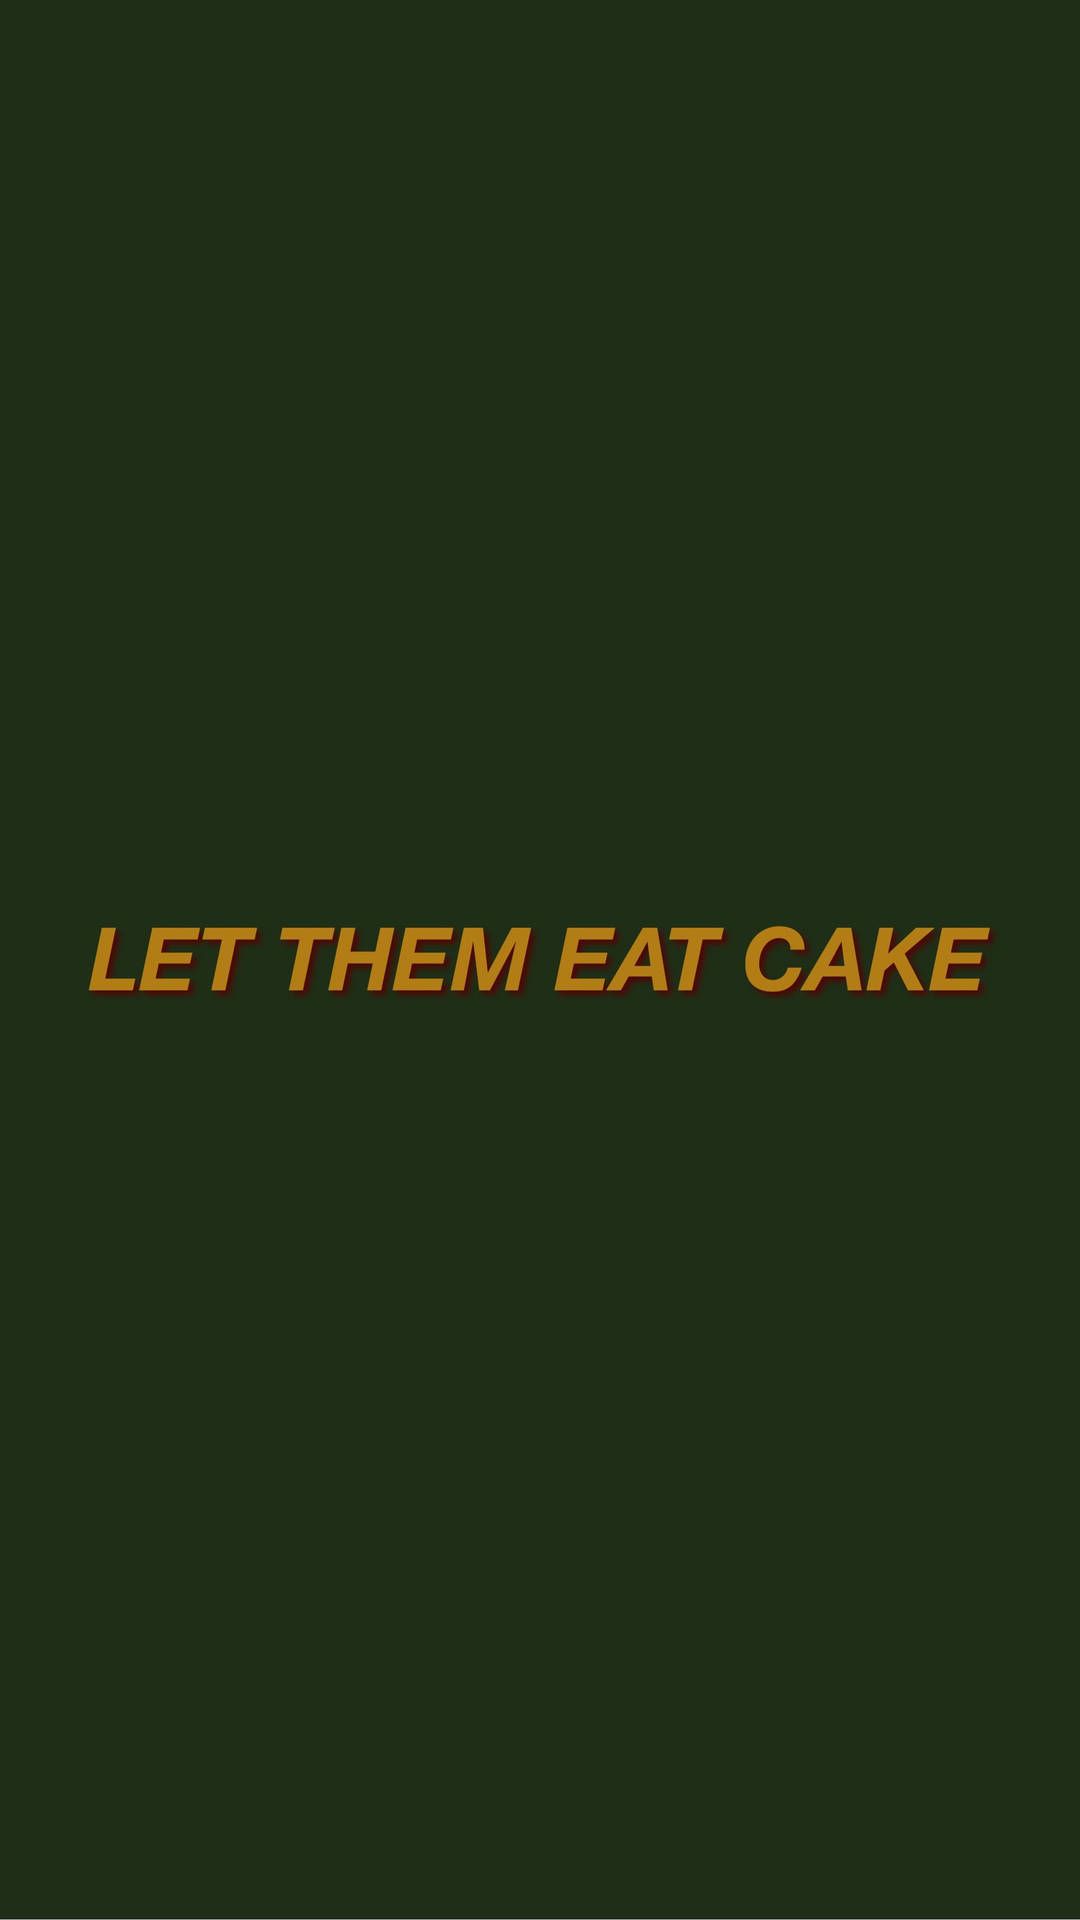 Eat Cake Quote Plain Green Background